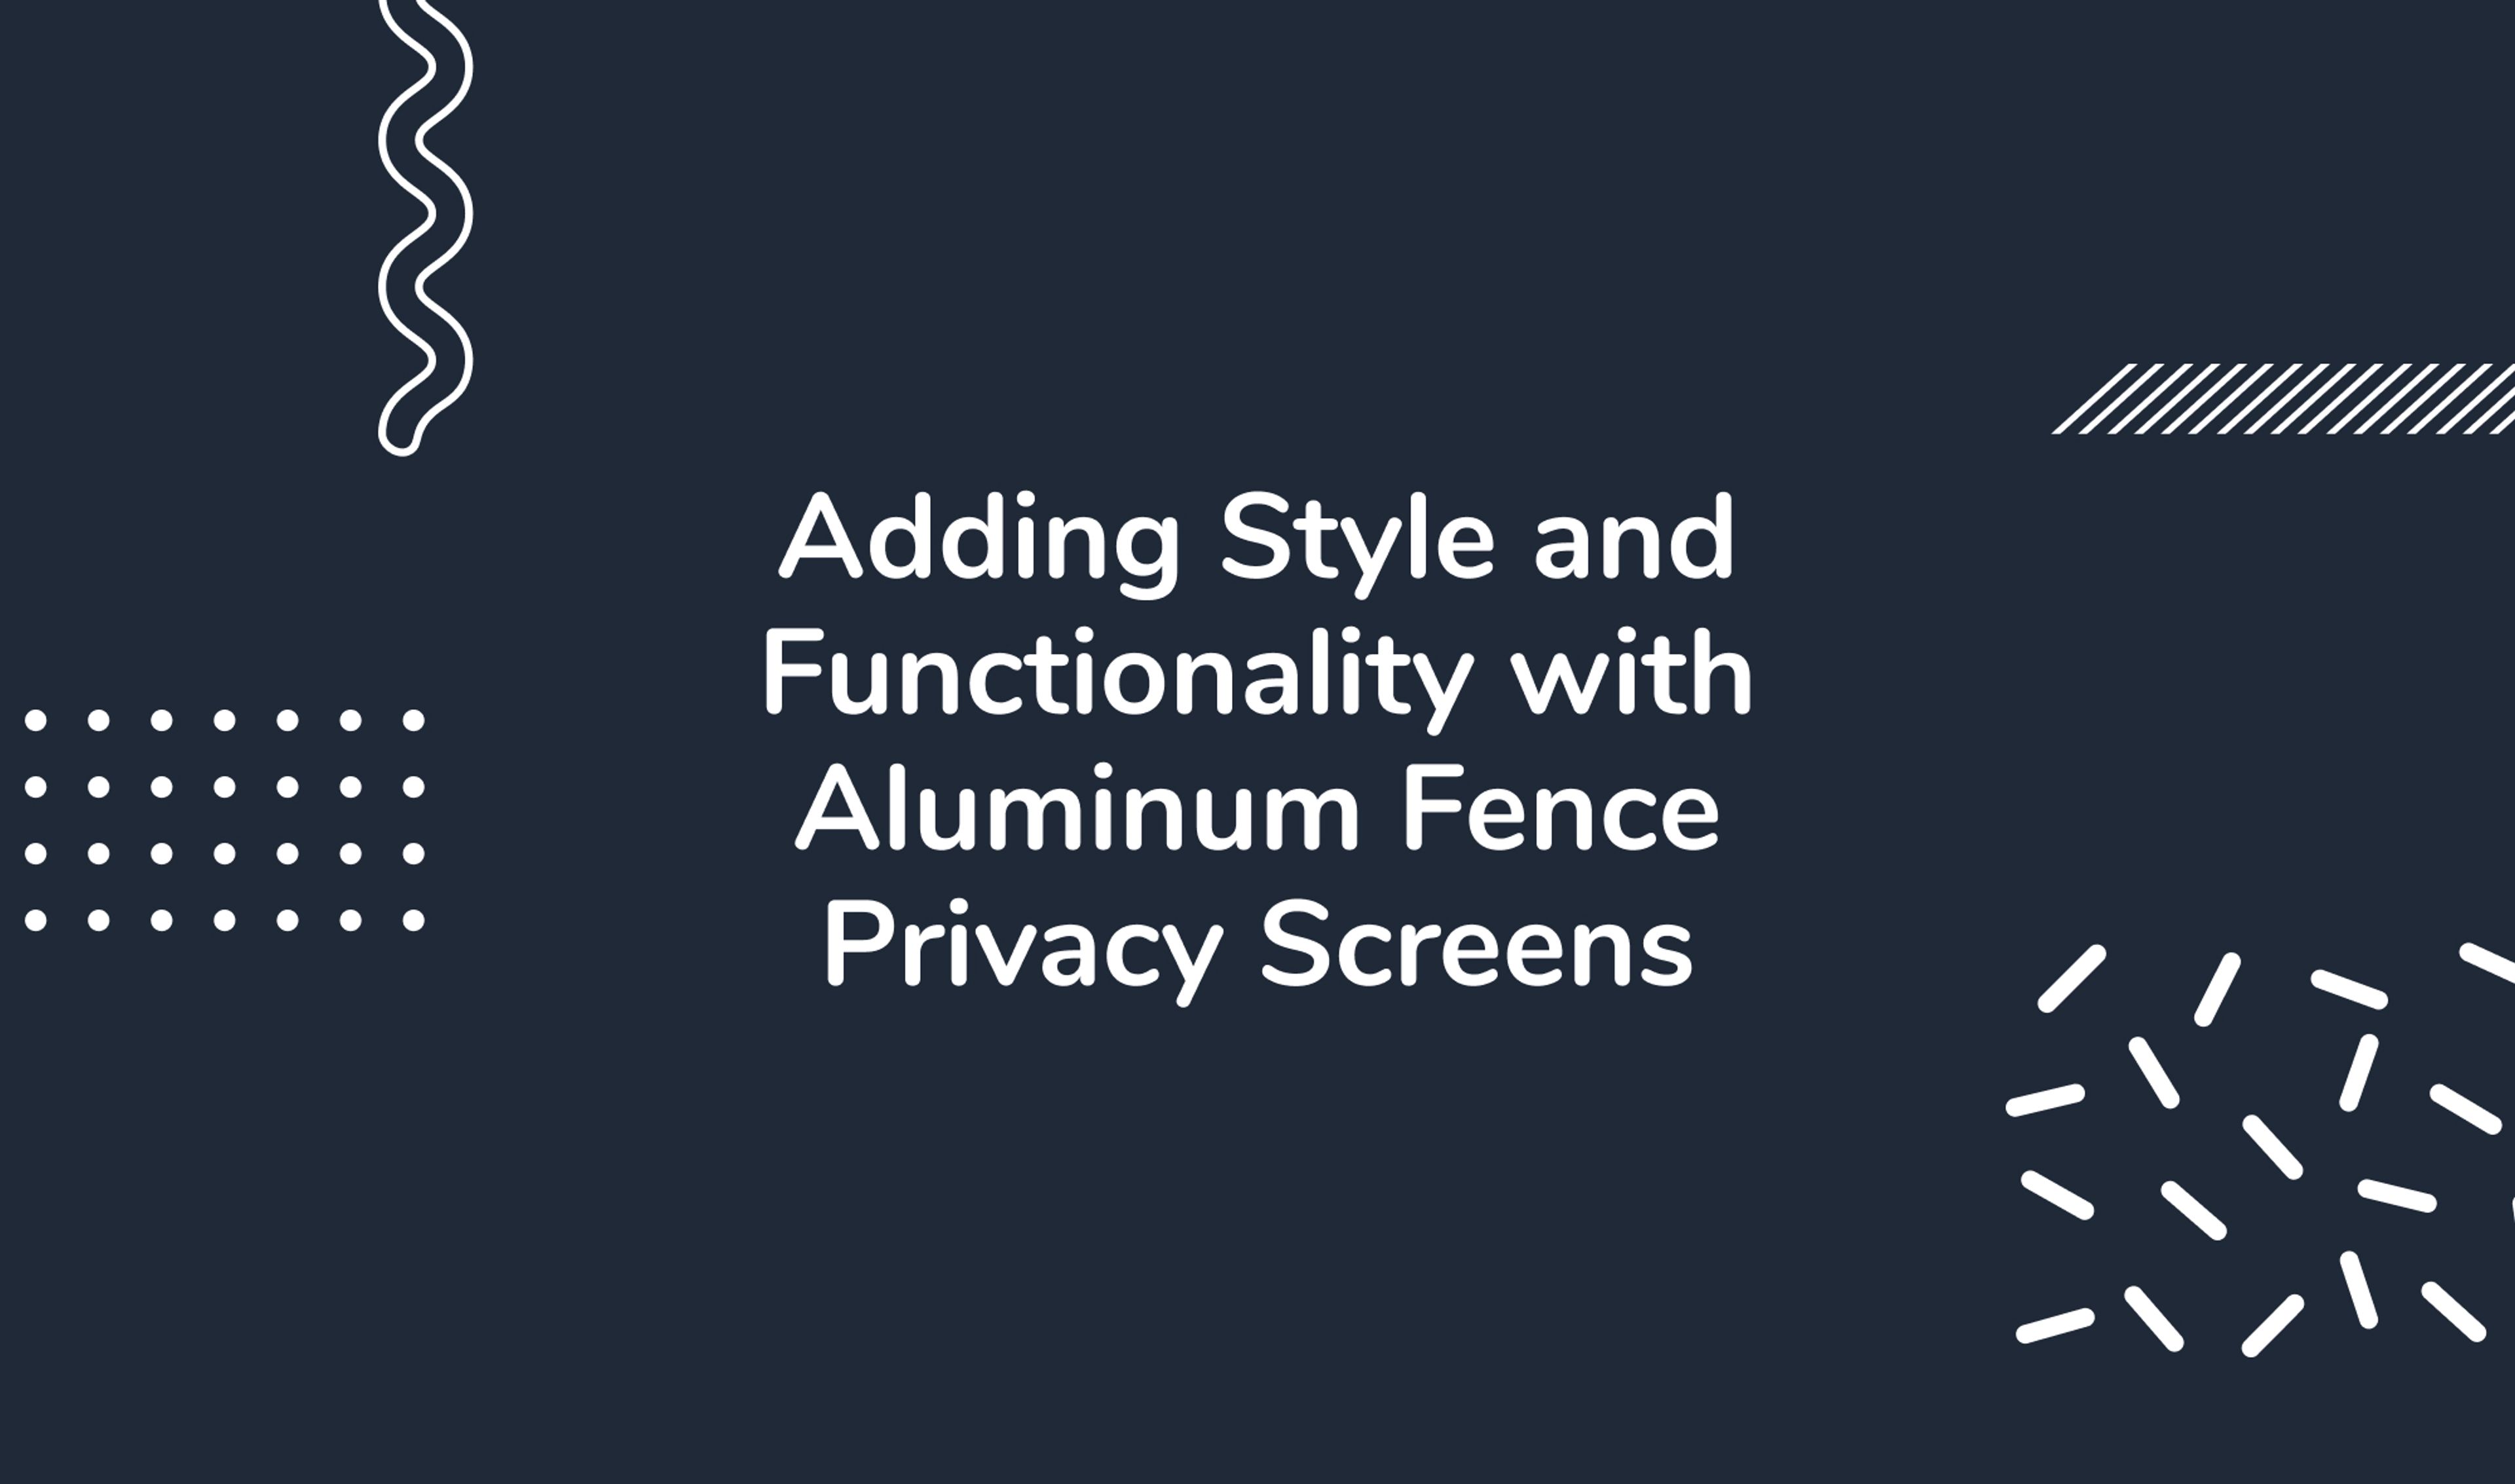 Enhance your home's security and privacy with an aluminum privacy fence ...